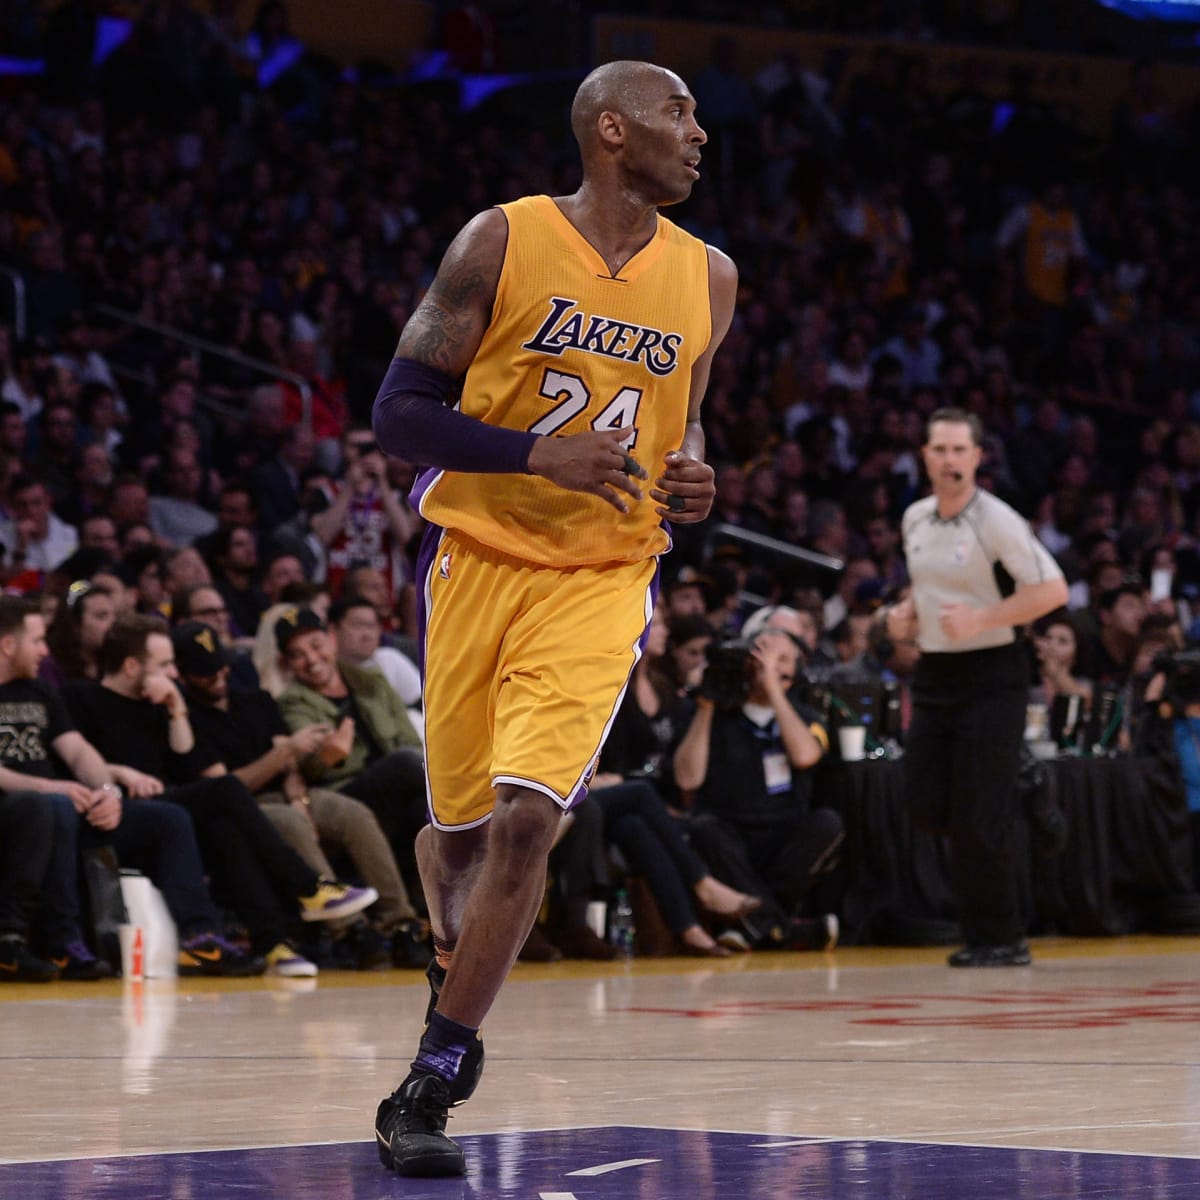 Kobe Bryant Rookie Jersey Sold at Auction for $2.73 Million - Sports  Illustrated